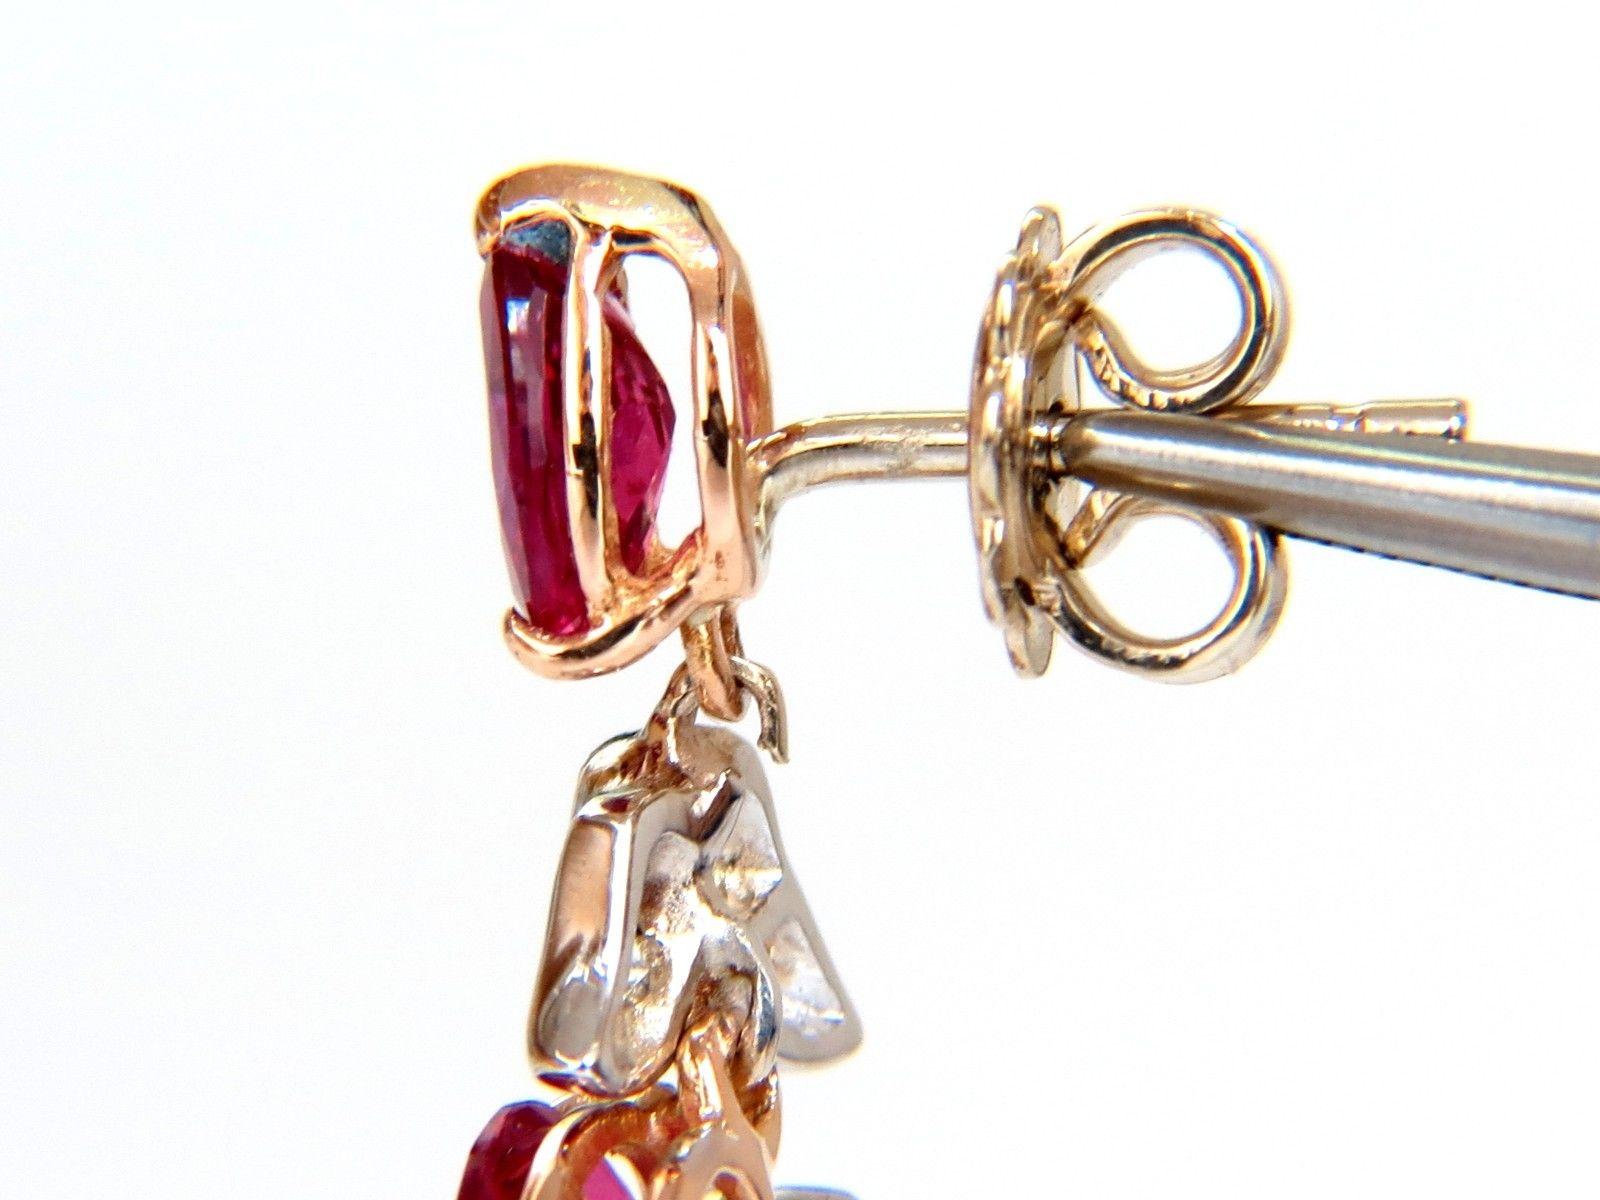 Diamond Custer Dangles & No heat Rubies Earrings

10.12ct. Natural Vivid Red Rubies

7.5 X 5.7 - 6.7 x 4.7 (range)

Full cut Pear brilliants.

Excellent, clean clarity & transparent

The Fine Pigeon Blood. 

(1) Ruby checked with GIA 

Report: